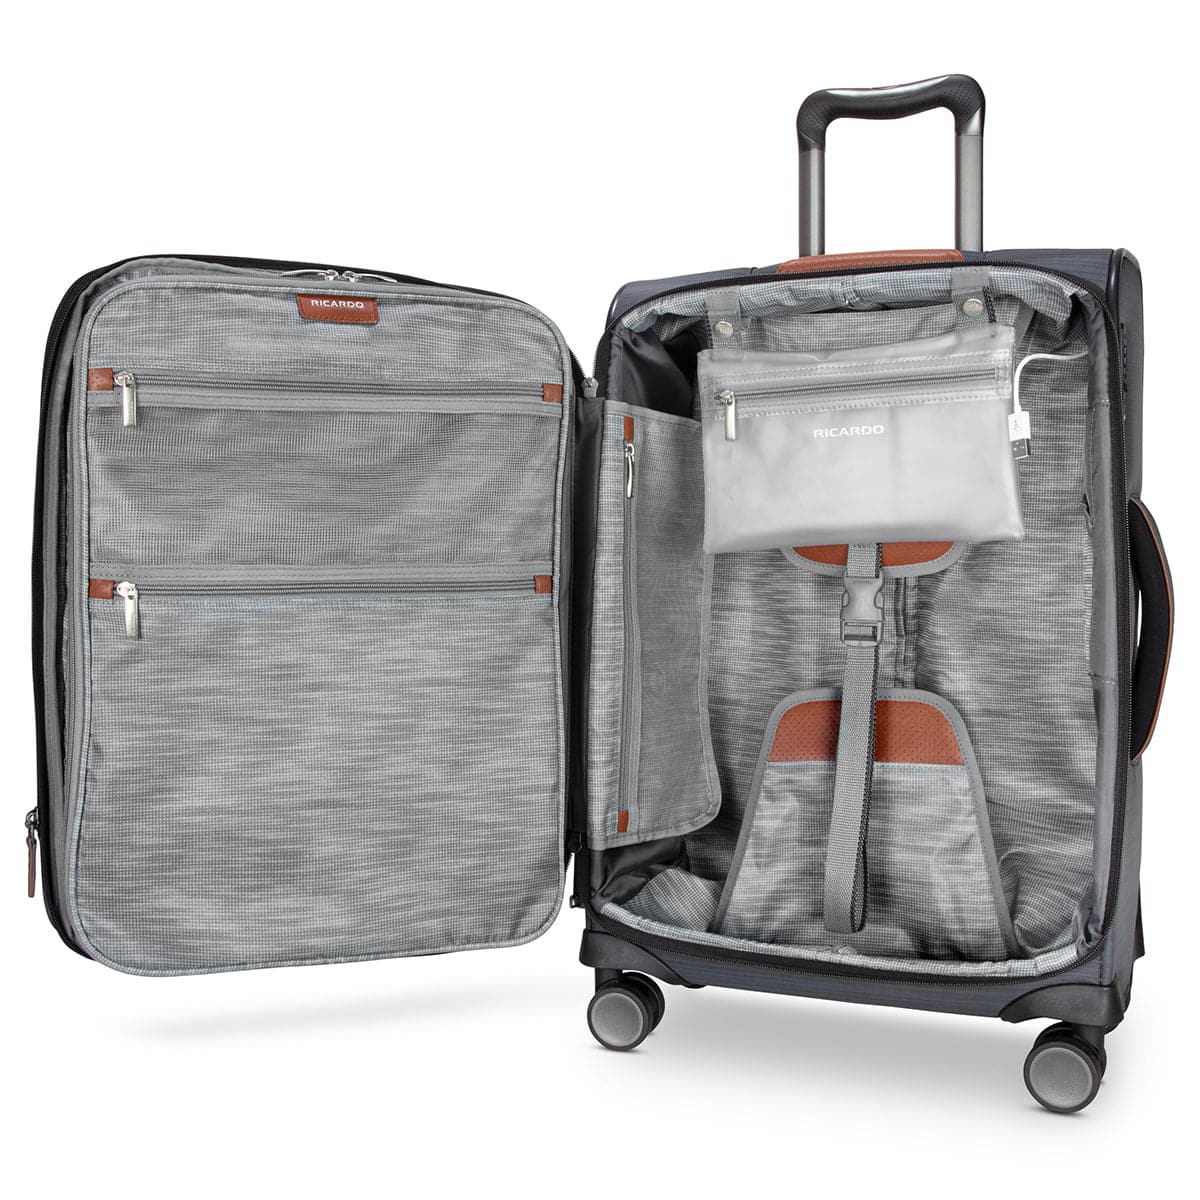 Ricardo Beverly Hills Montecito 2.0 Soft Side Carry-On Luggage